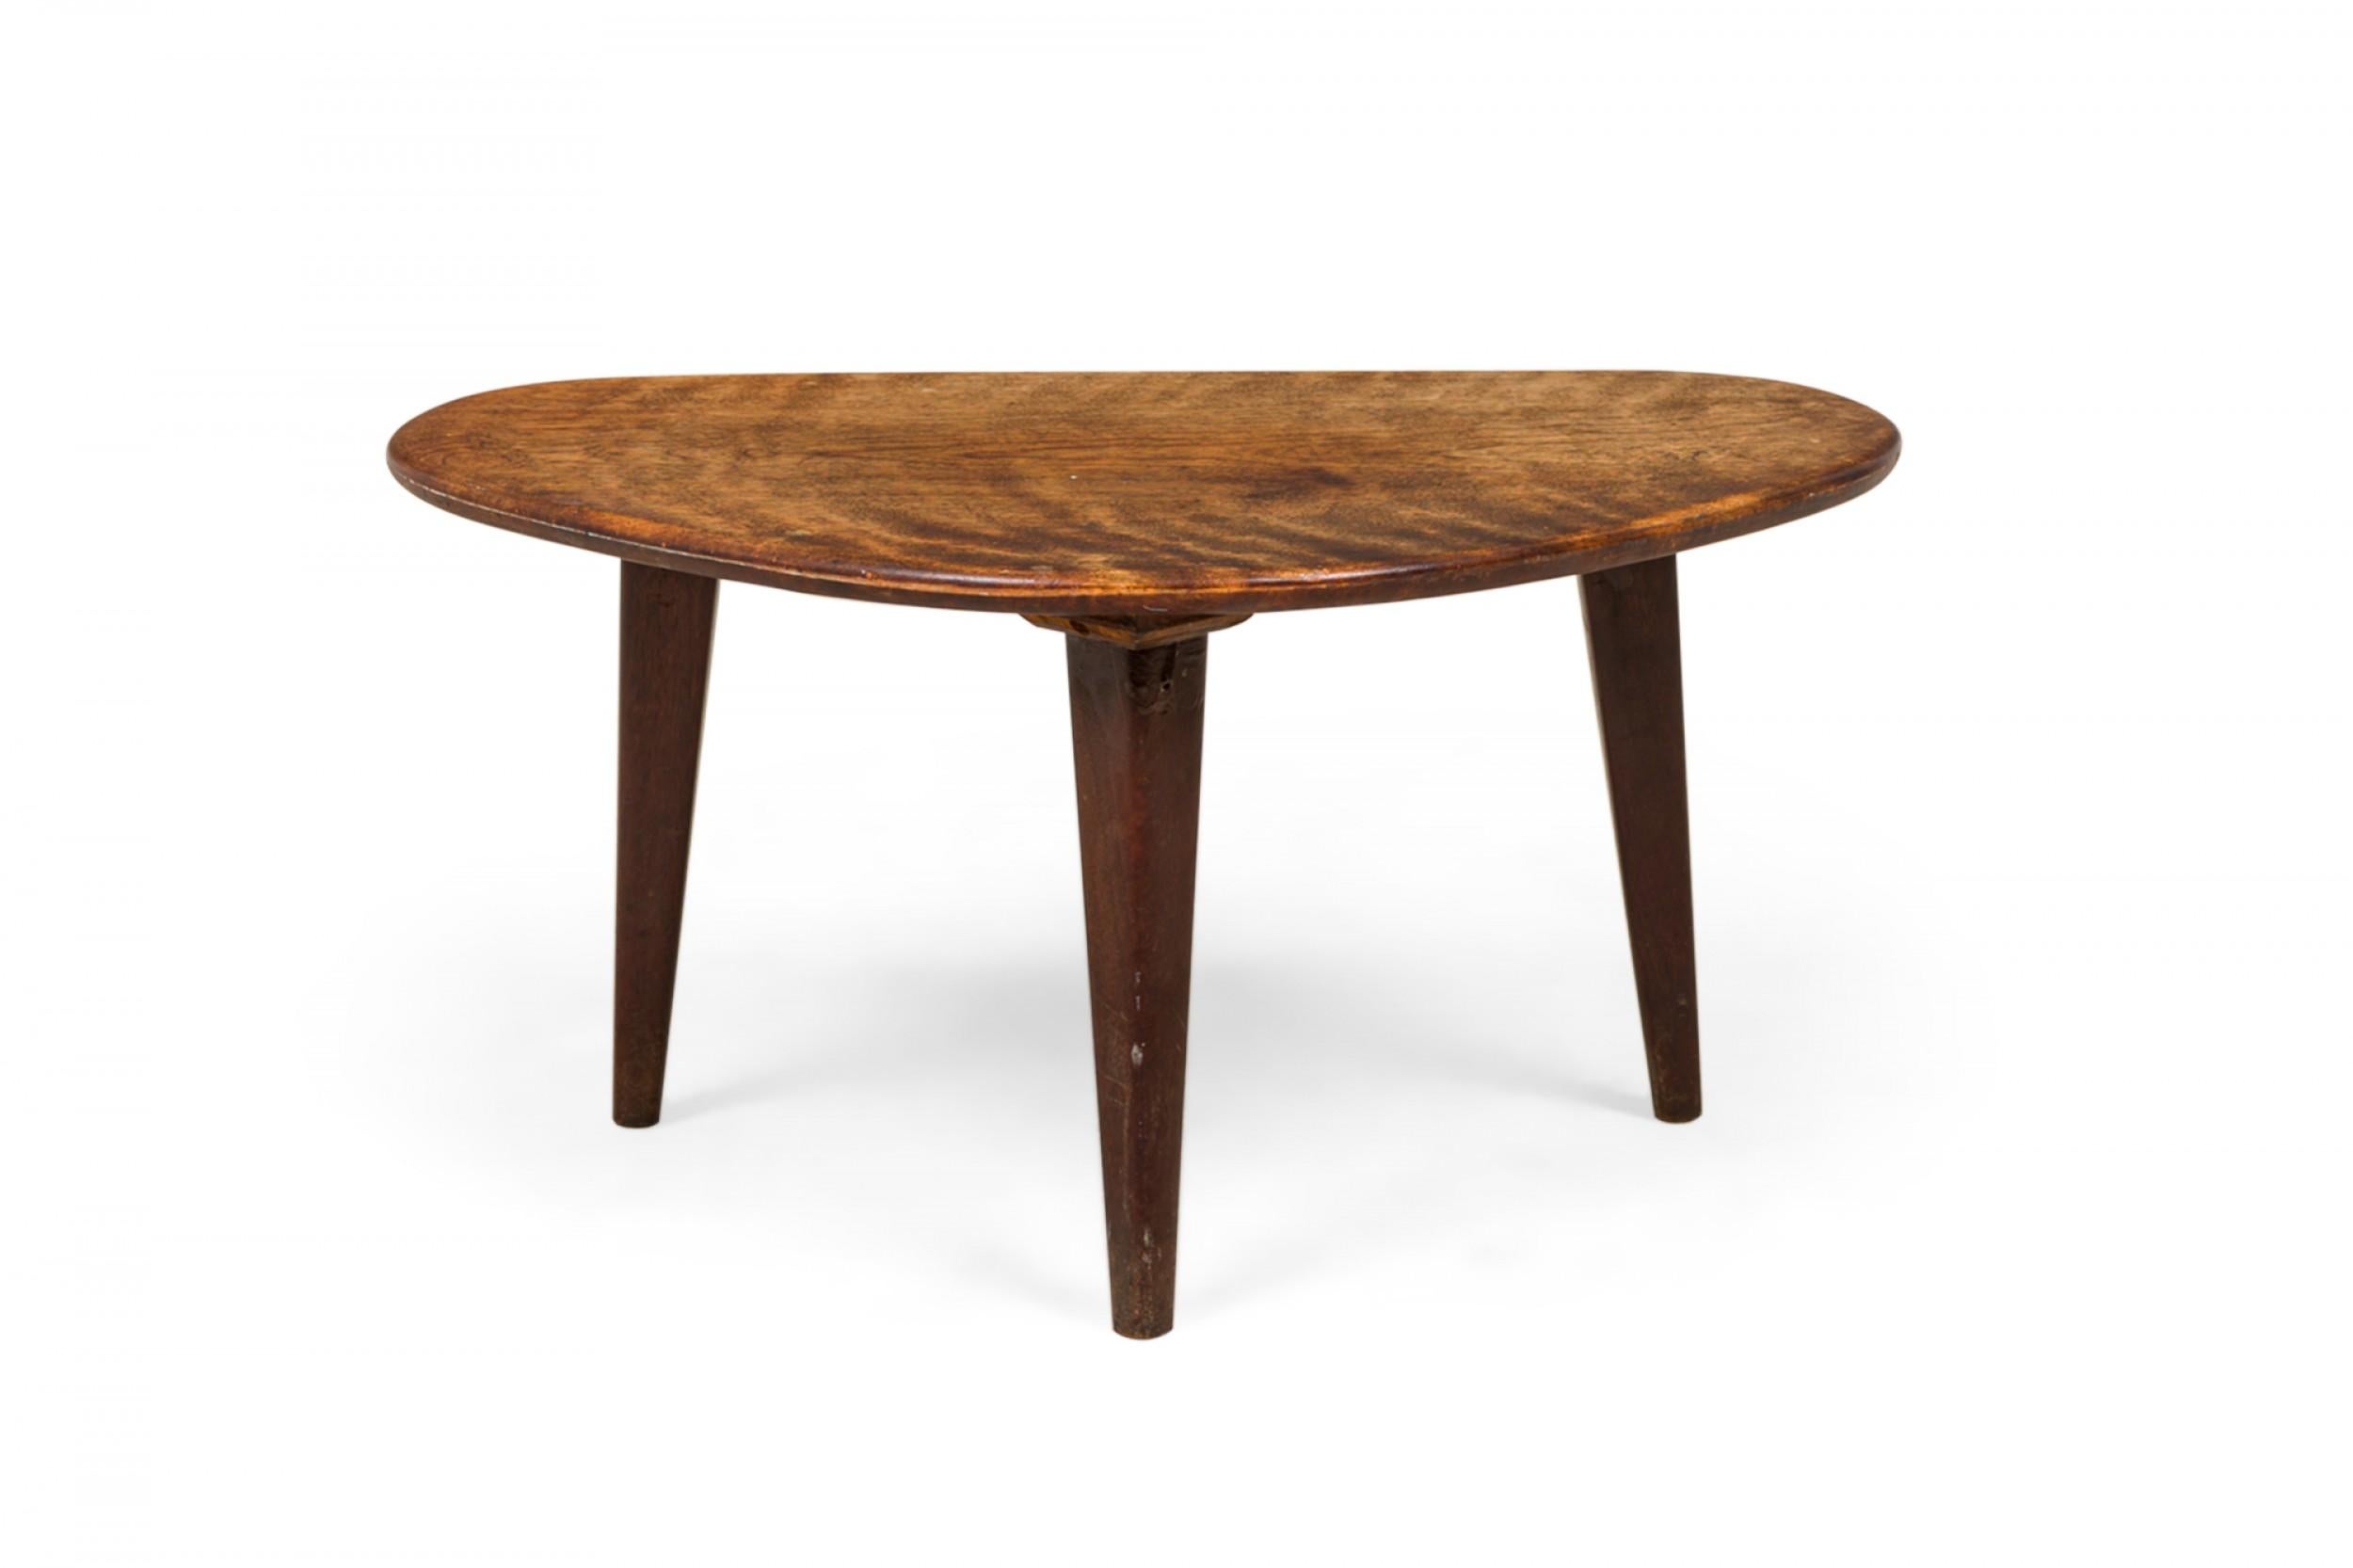 American mid-century walnut occasional table with a triangular top with rounded corners, resting on three squared and tapered legs.